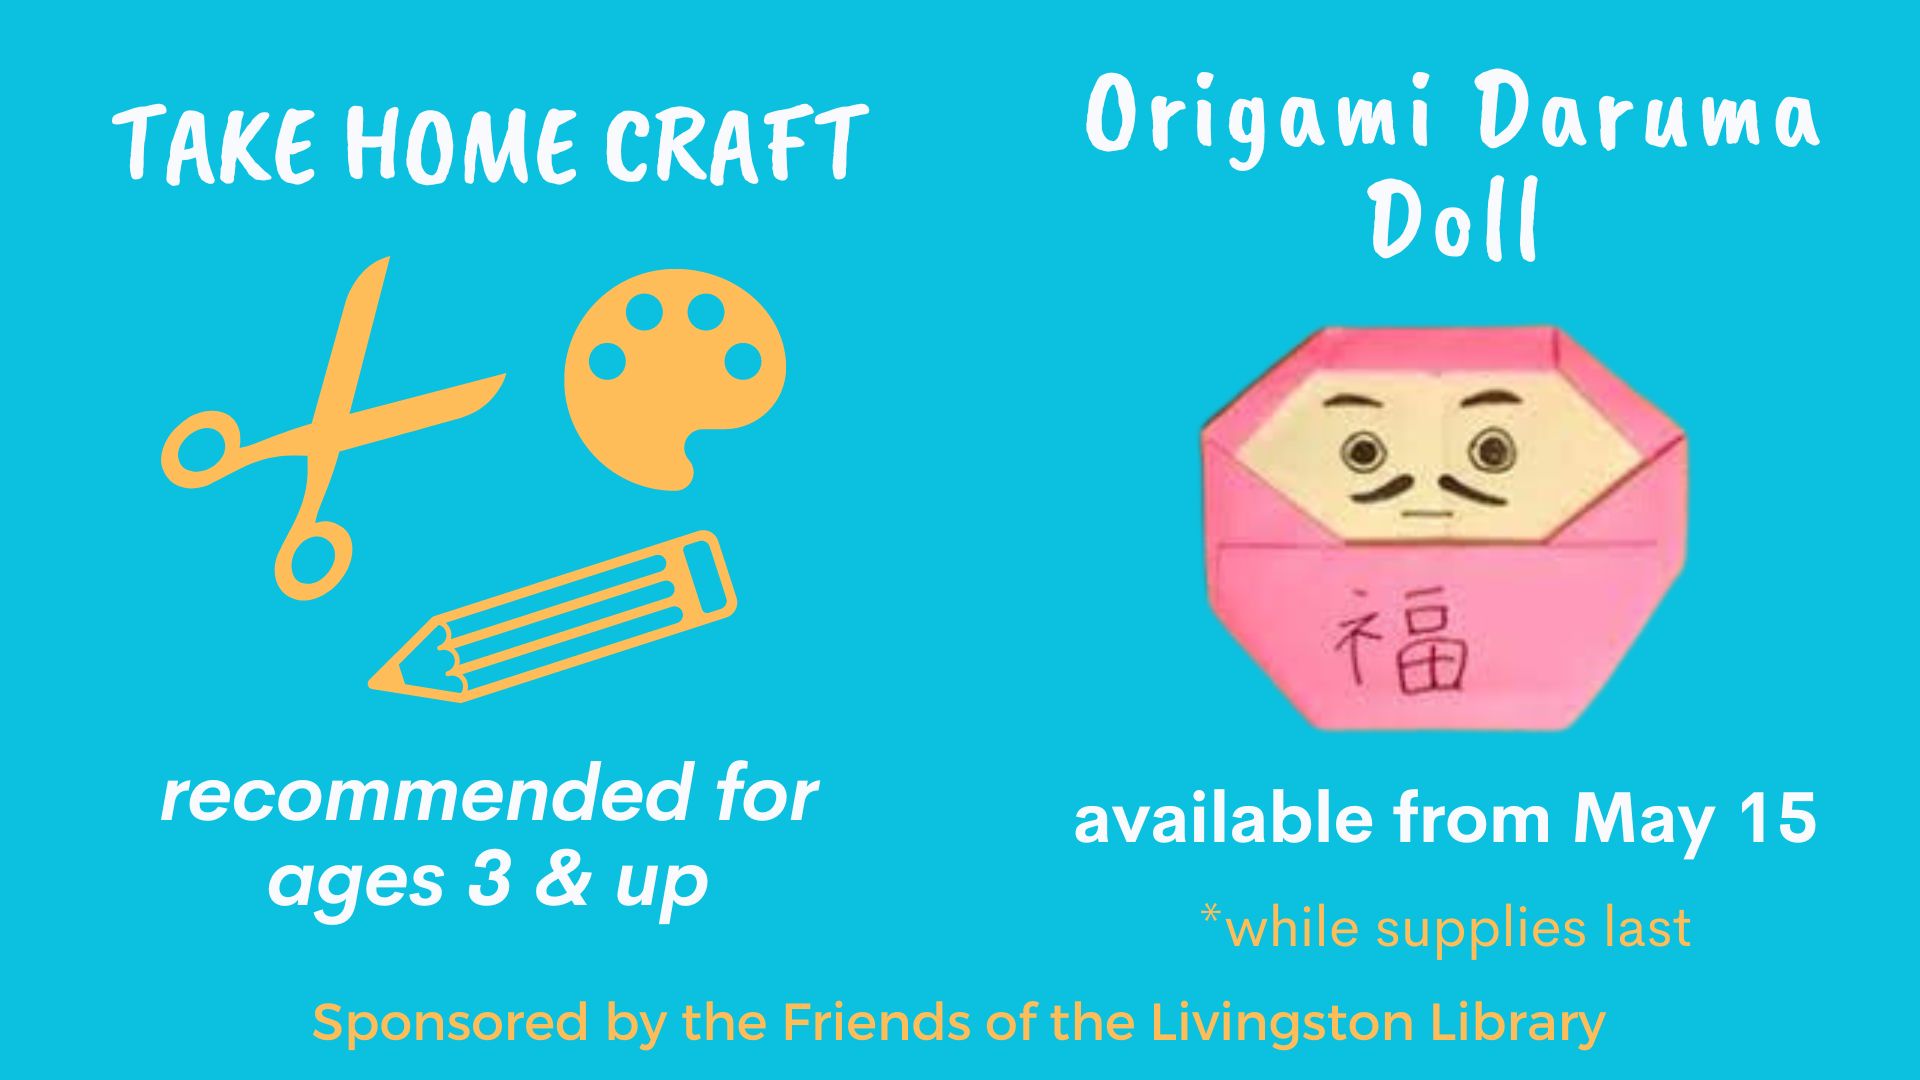 teal background with white text reading take home craft origami daruma doll with a picture of a round origami doll with a tan face and pink clothing